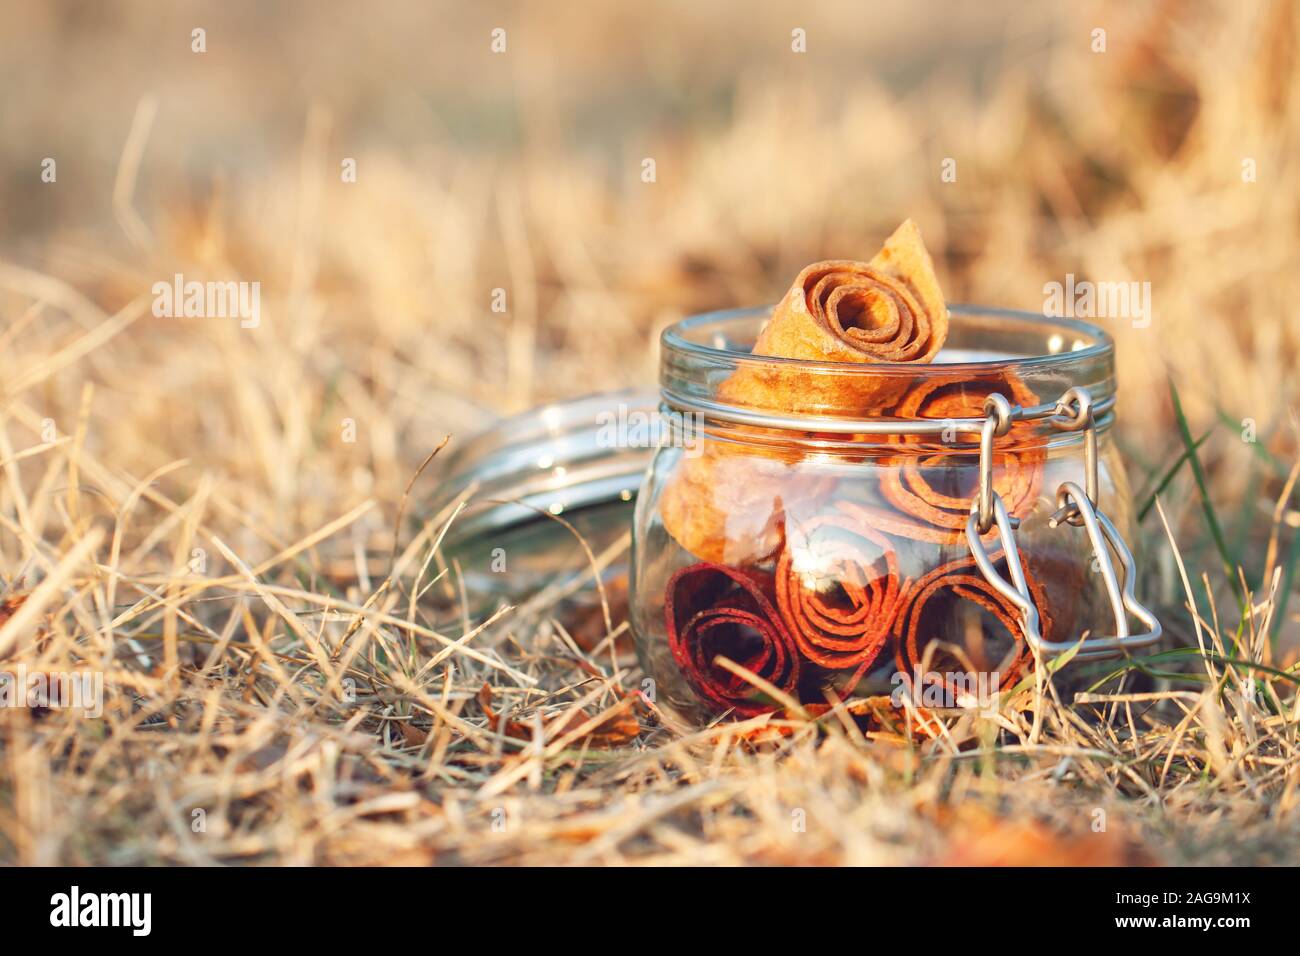 Glass jar with fruit pastille roll-up on a natural grassy background. The concept of healthy organic sweets, proper nutrition, zero waste, vegan. Stock Photo